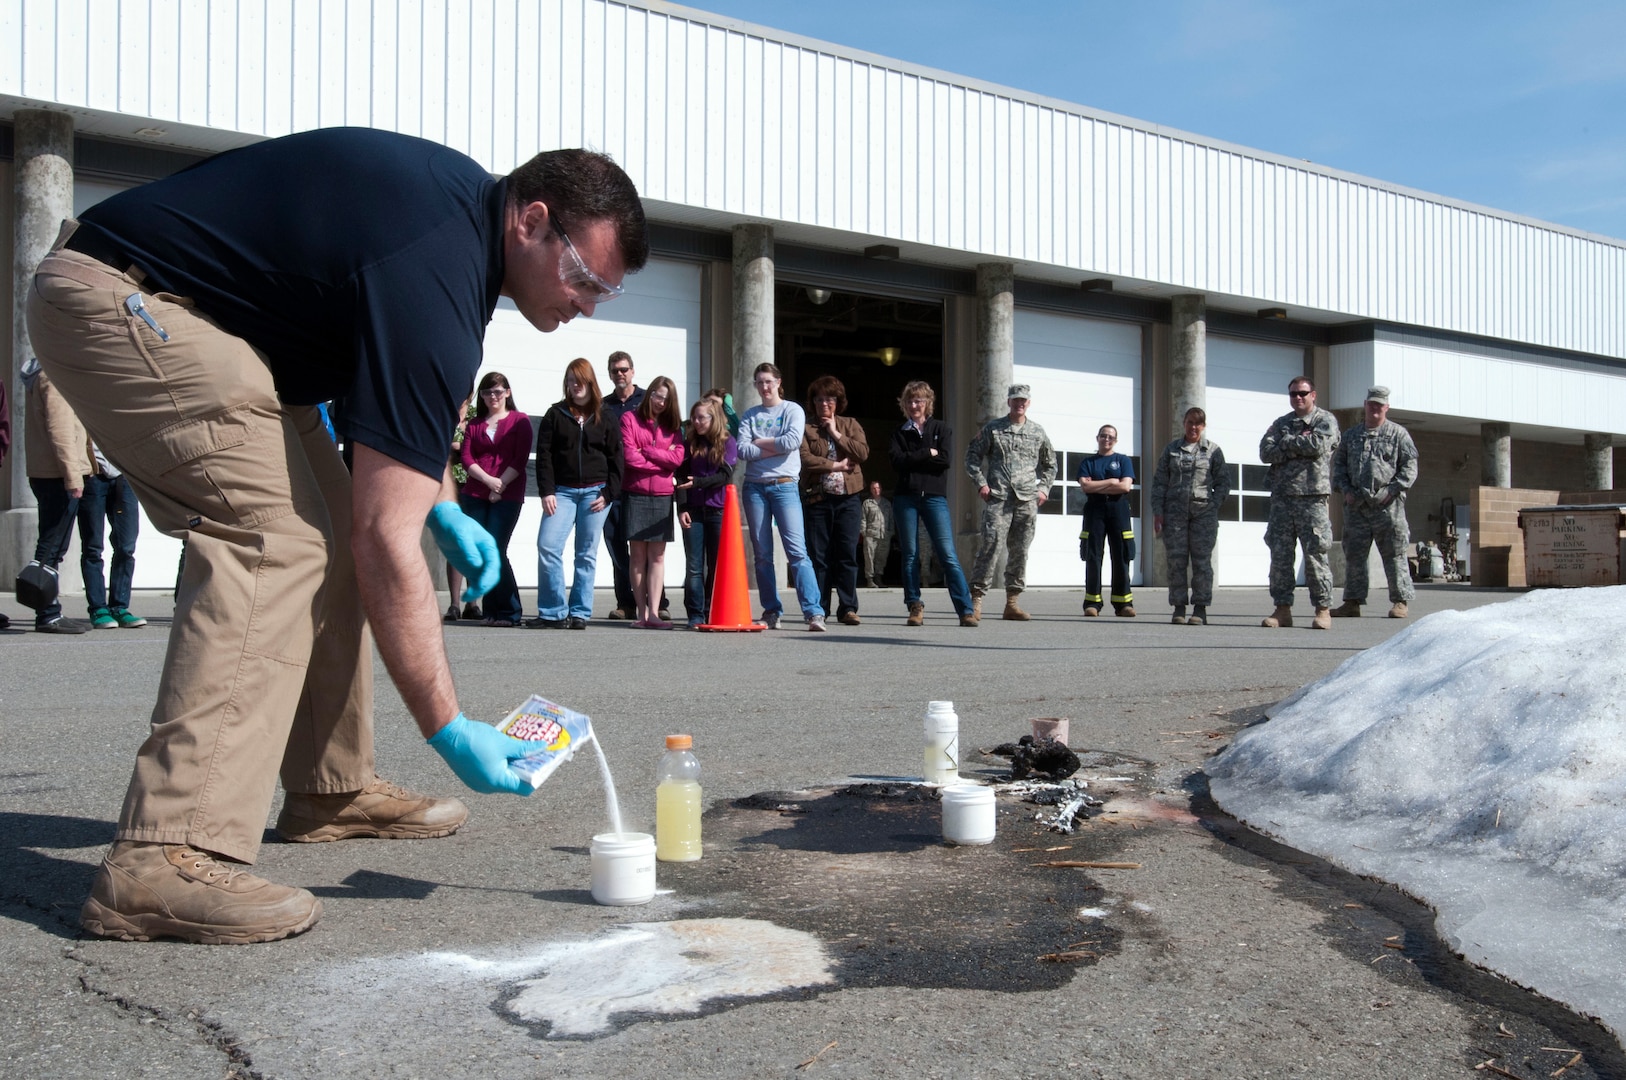 Army 1st Lt. Allen Hulse, science officer with the 103rd Civil Support Team mixes chemicals during a demonstration to chemistry students from Grace Christian School in Anchorage, Alaska. Members of the 103ed CST met with the students as a way to show hands-on and real-world applications for what they are learning in the classroom.